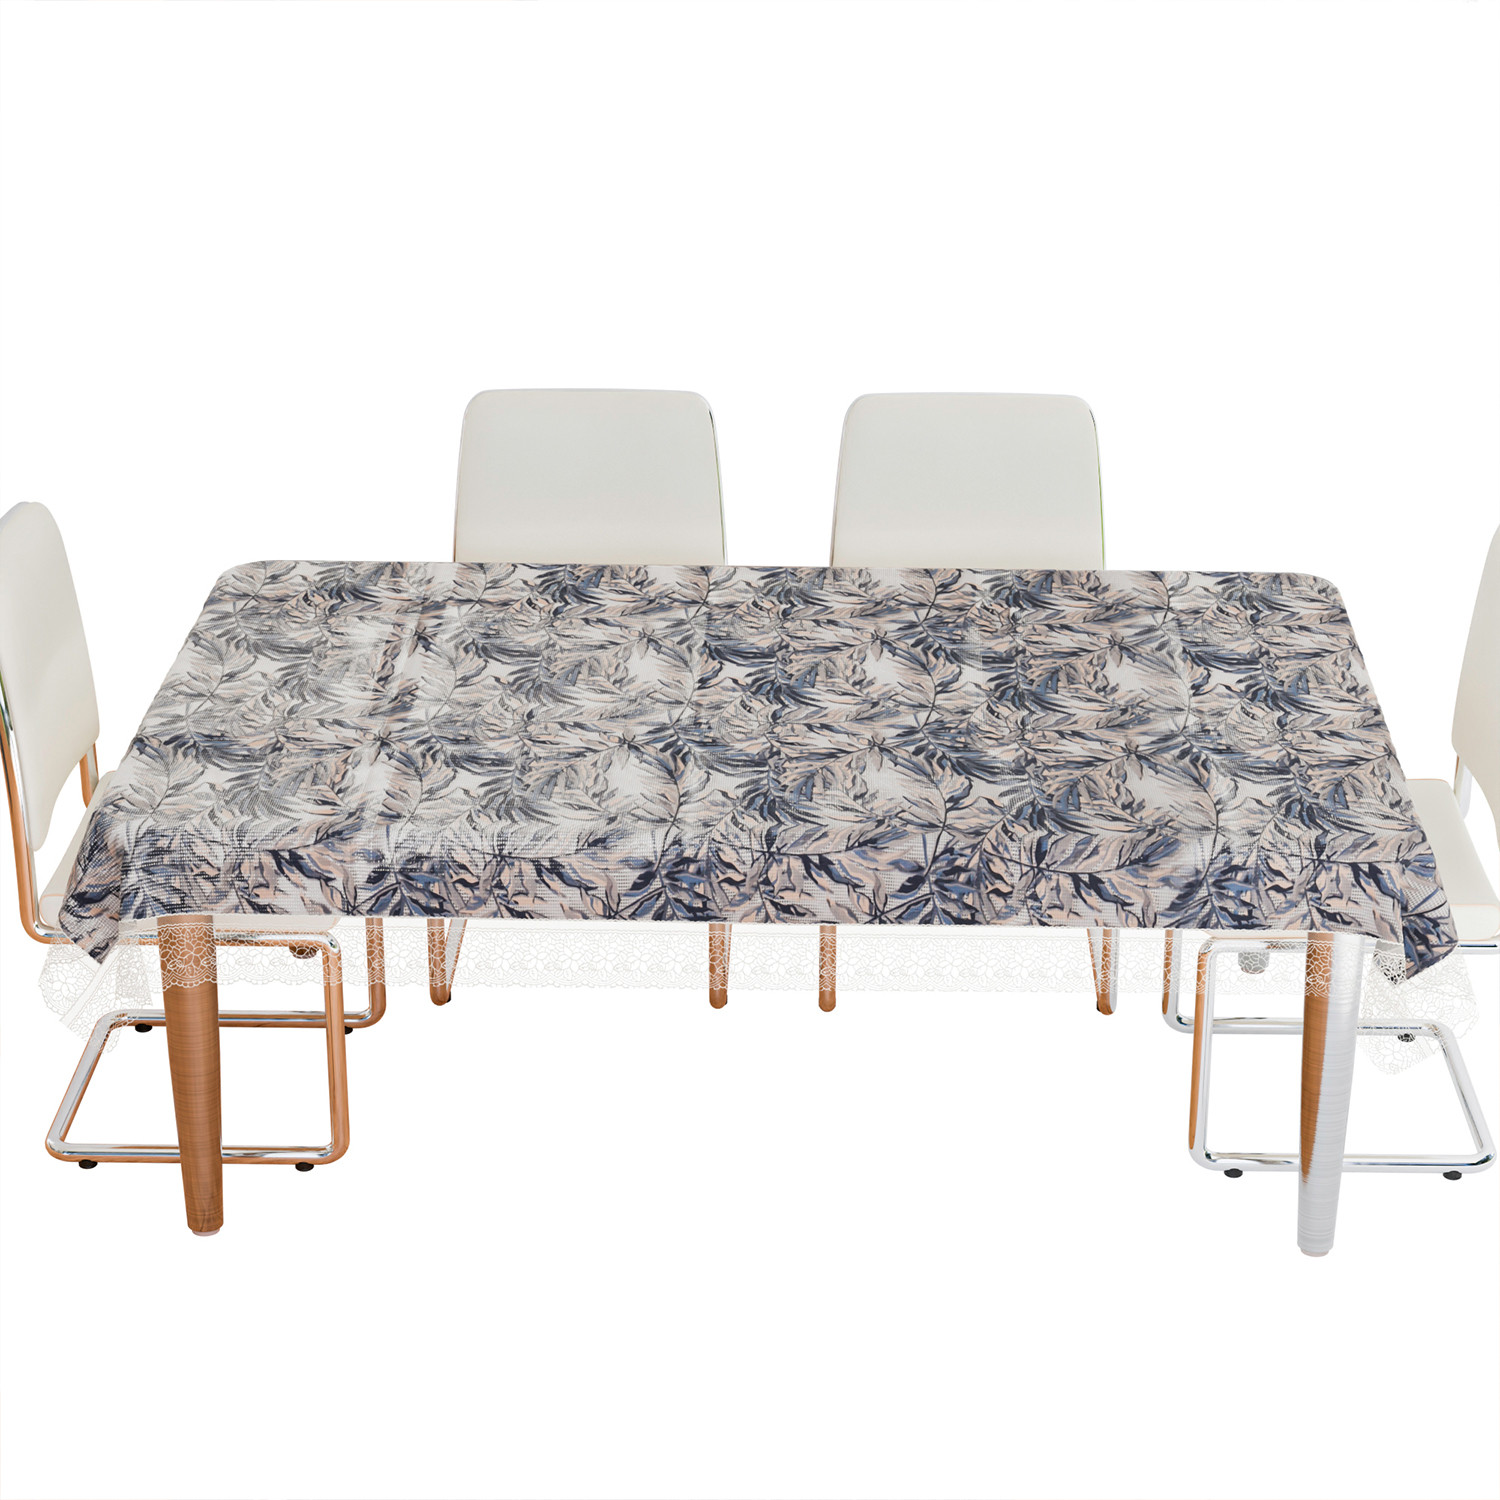 Kuber Industries Dining Table Cover | PVC Table Cloth Cover | 6 Seater Table Cloth | Leaf Gripper Table Cover | Table Protector | Table Cover for Dining Table | 60x90 Inch | DTC | Blue